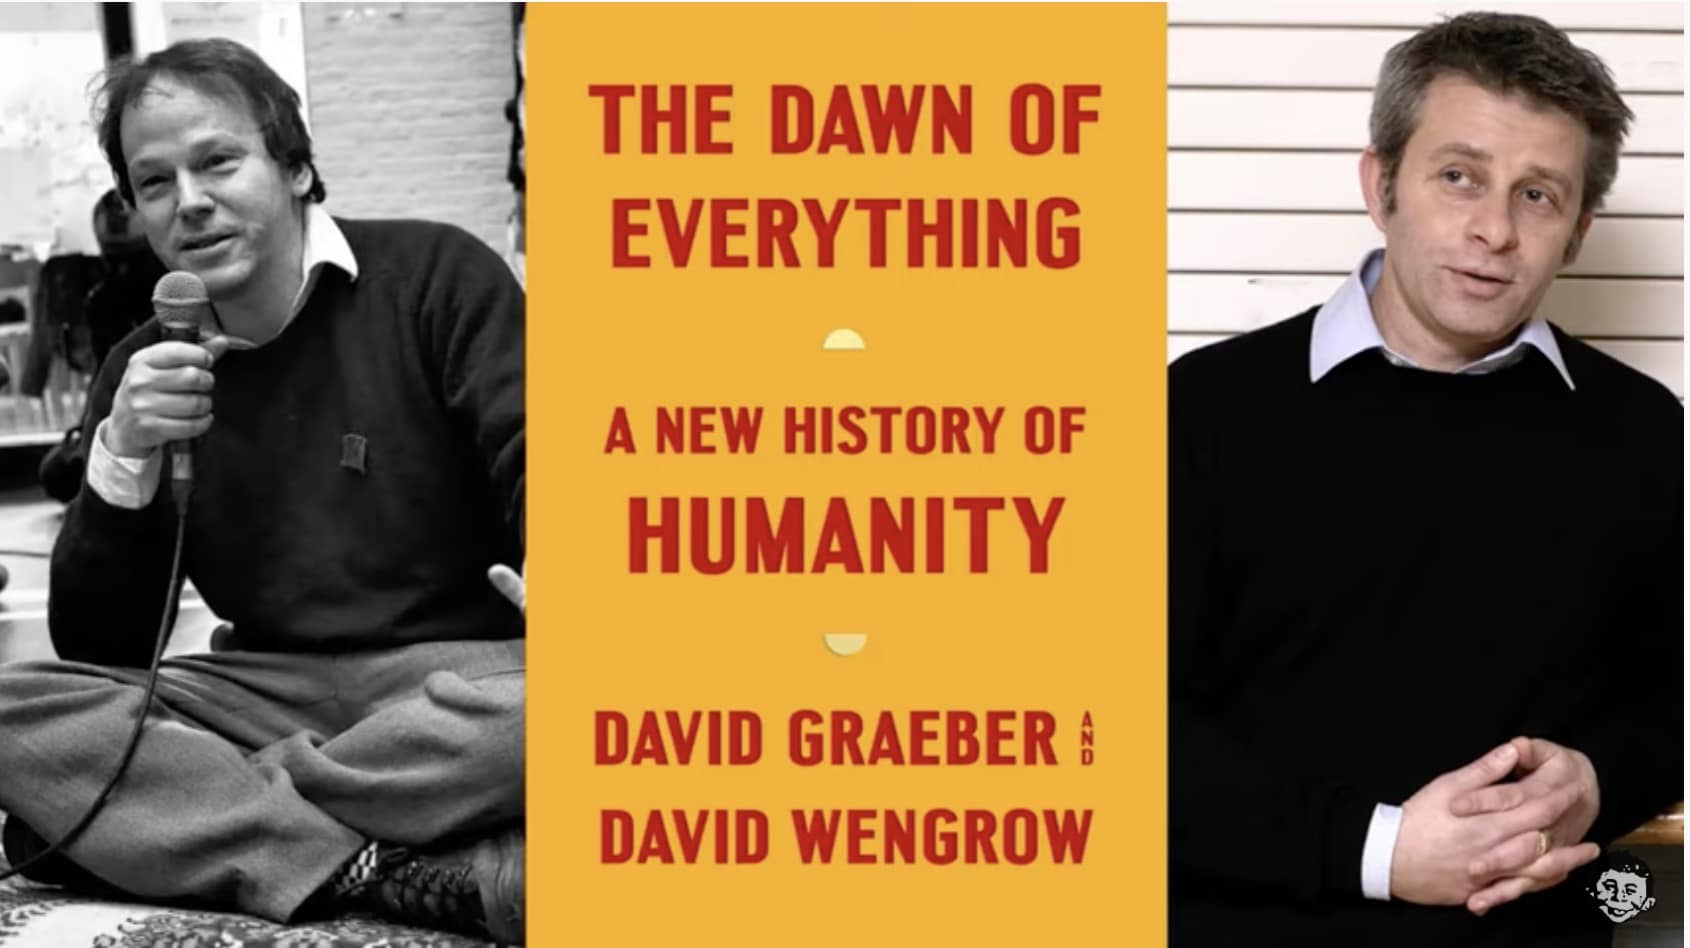 The dawn of everything- A new history of Humanity -  Un livre de David Graeber David Wengrow